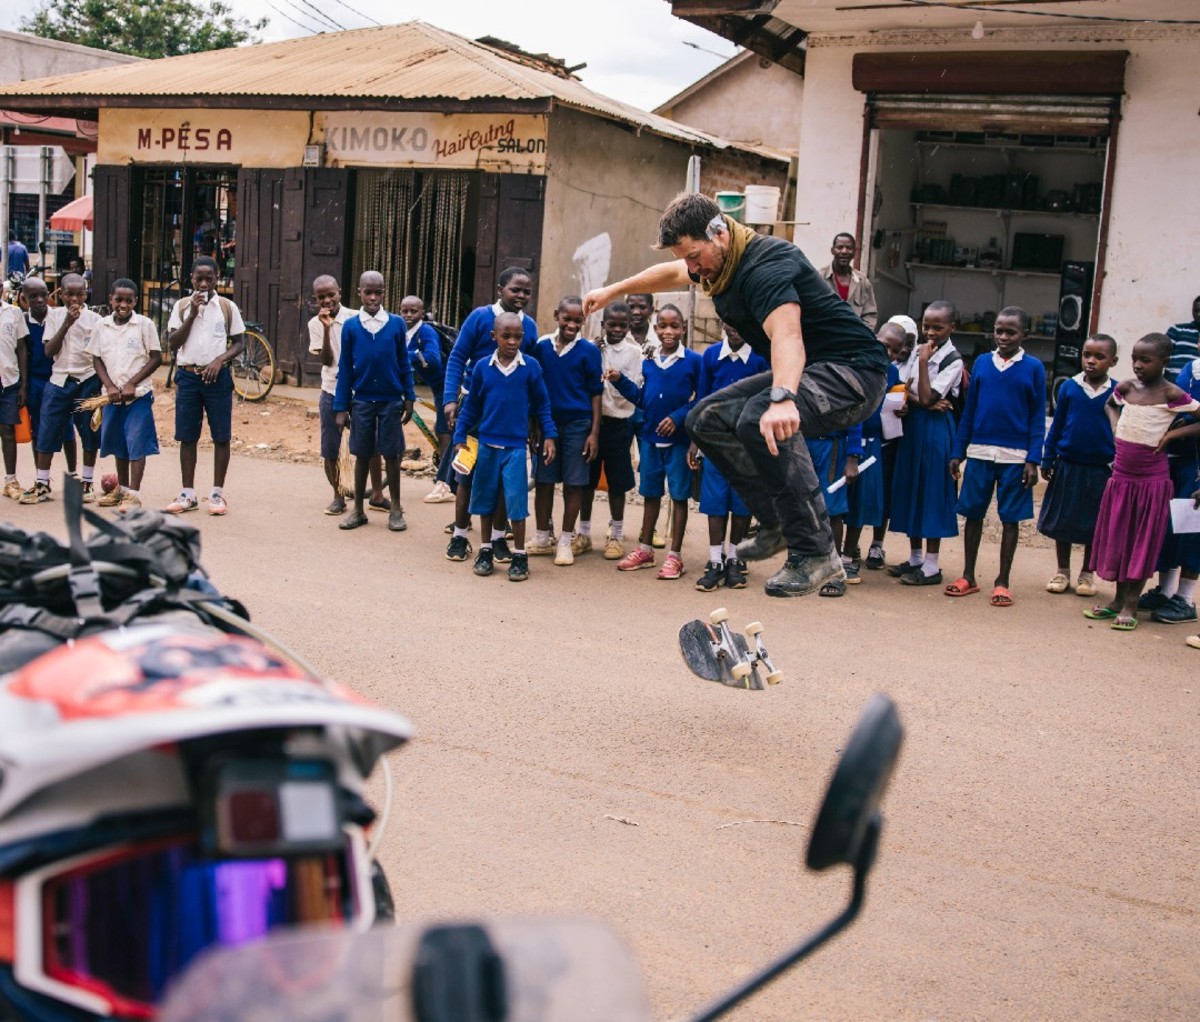 Motorcyclist performs skateboarding tricks for a crowd of young school kids in an African village